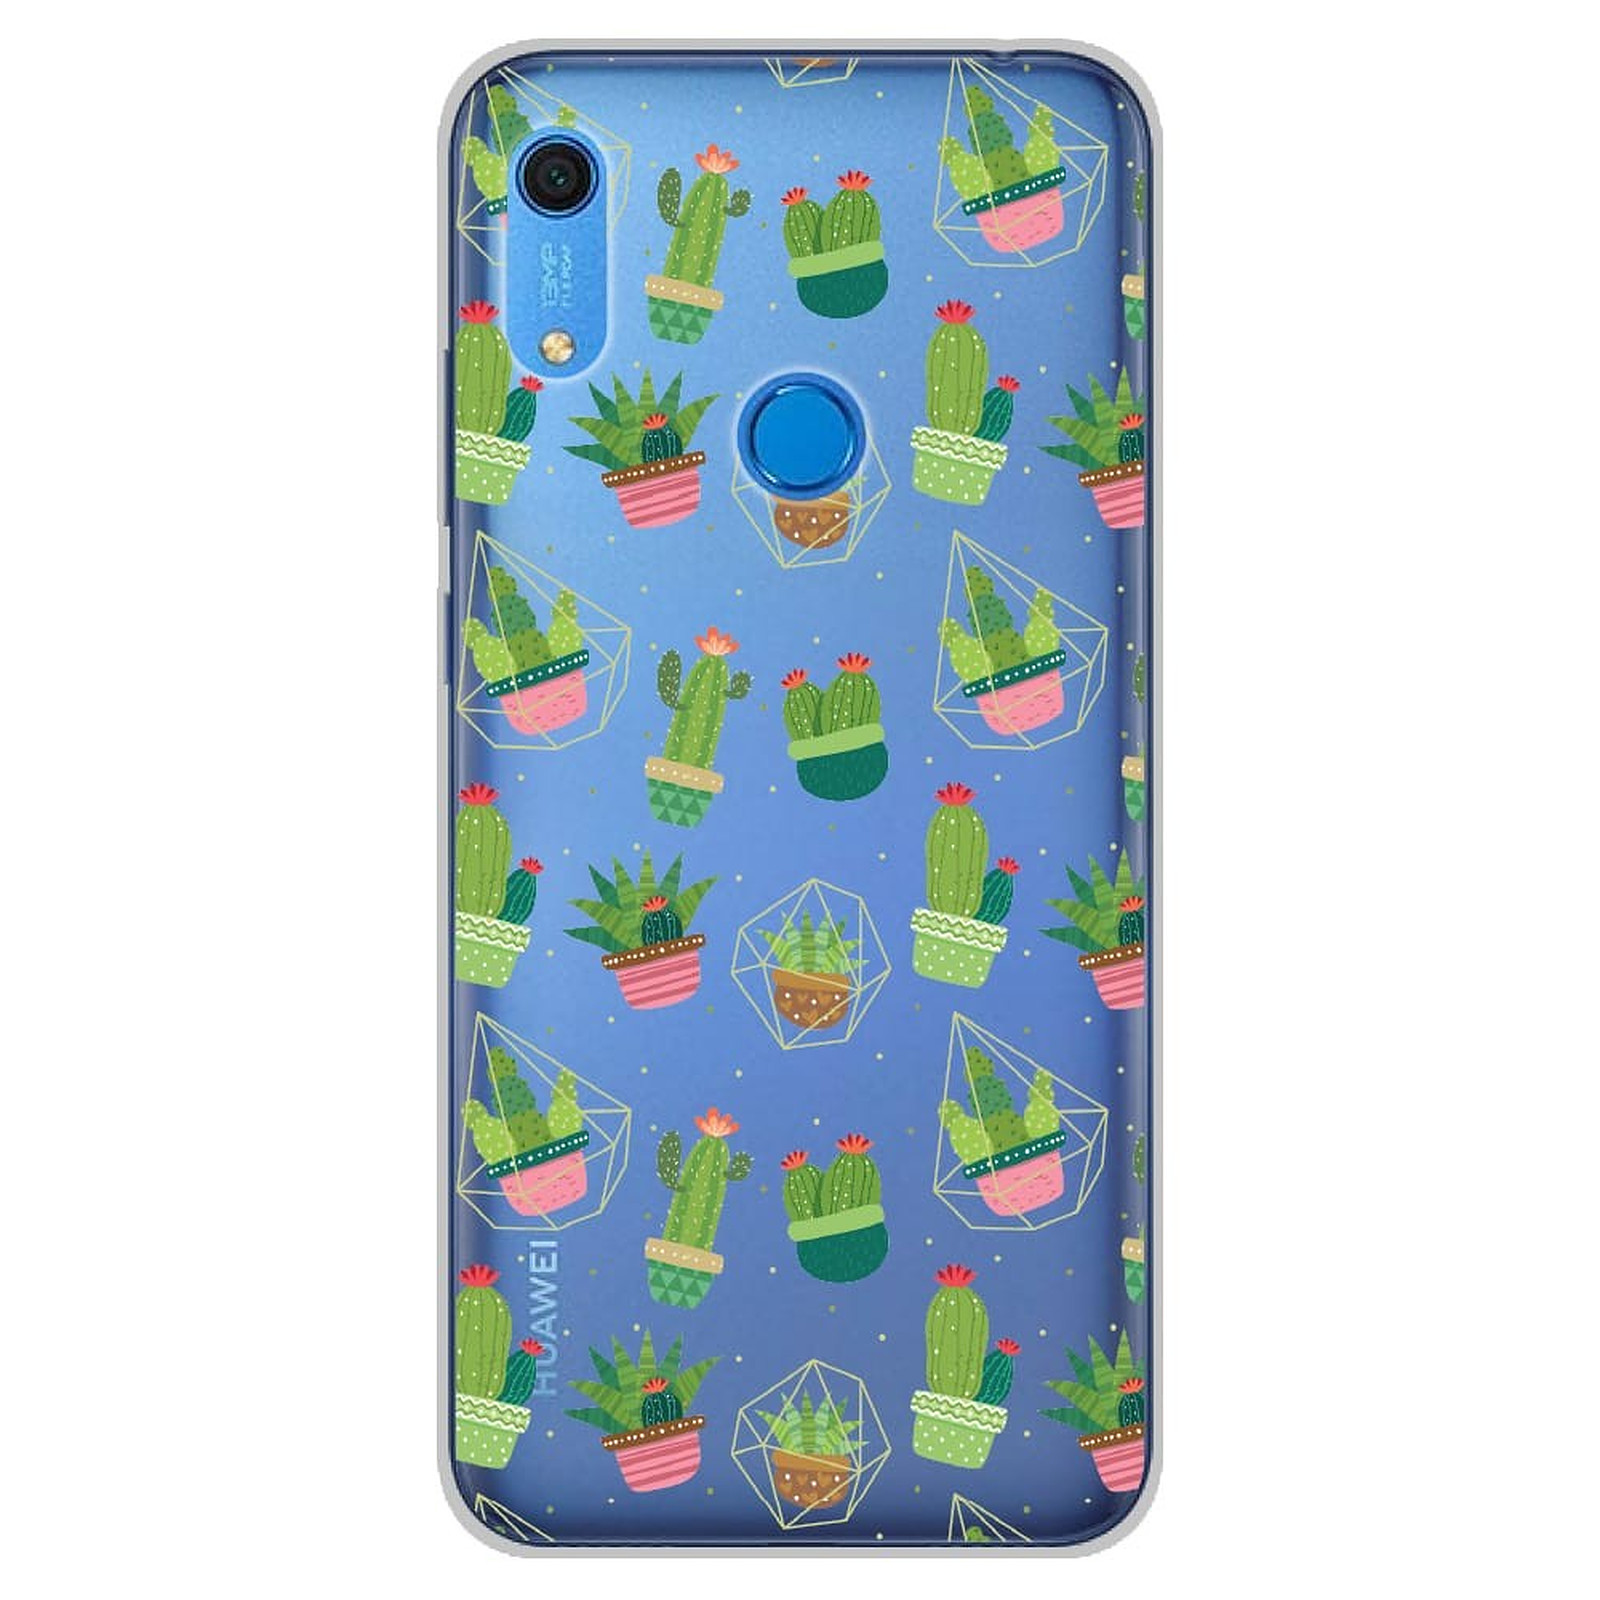 1001 Coques Coque silicone gel Huawei Y6S motif Cactus - Coque telephone 1001Coques